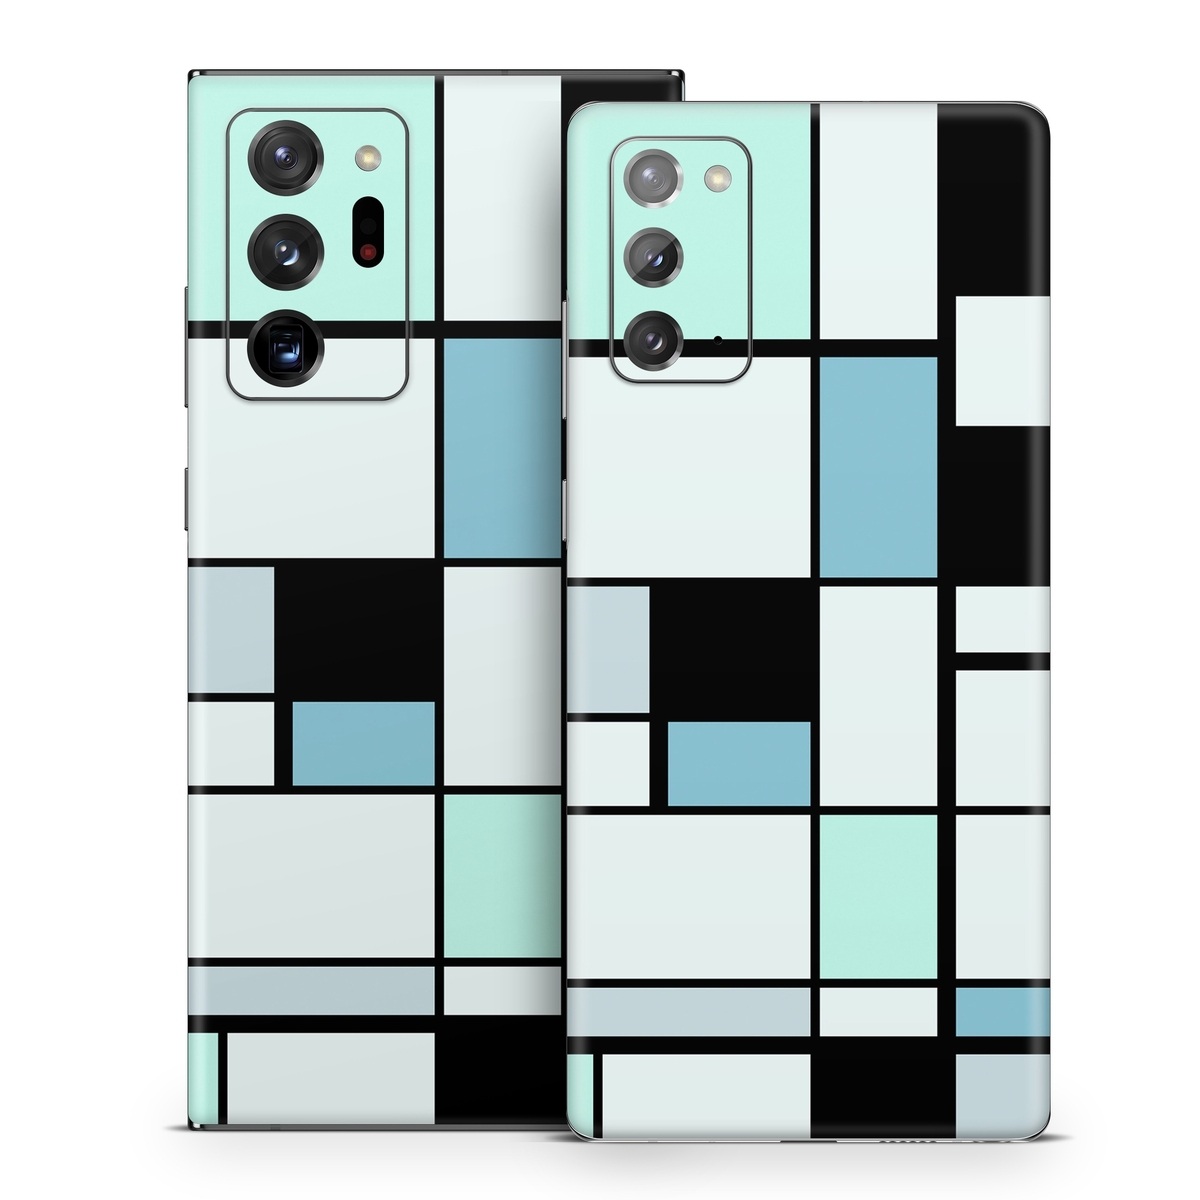 Samsung Galaxy Note 20 Series Skin design of Blue, Line, Turquoise, Pattern, Rectangle, Design, Parallel, Square, Symmetry, Tints and shades, with black, blue, green colors